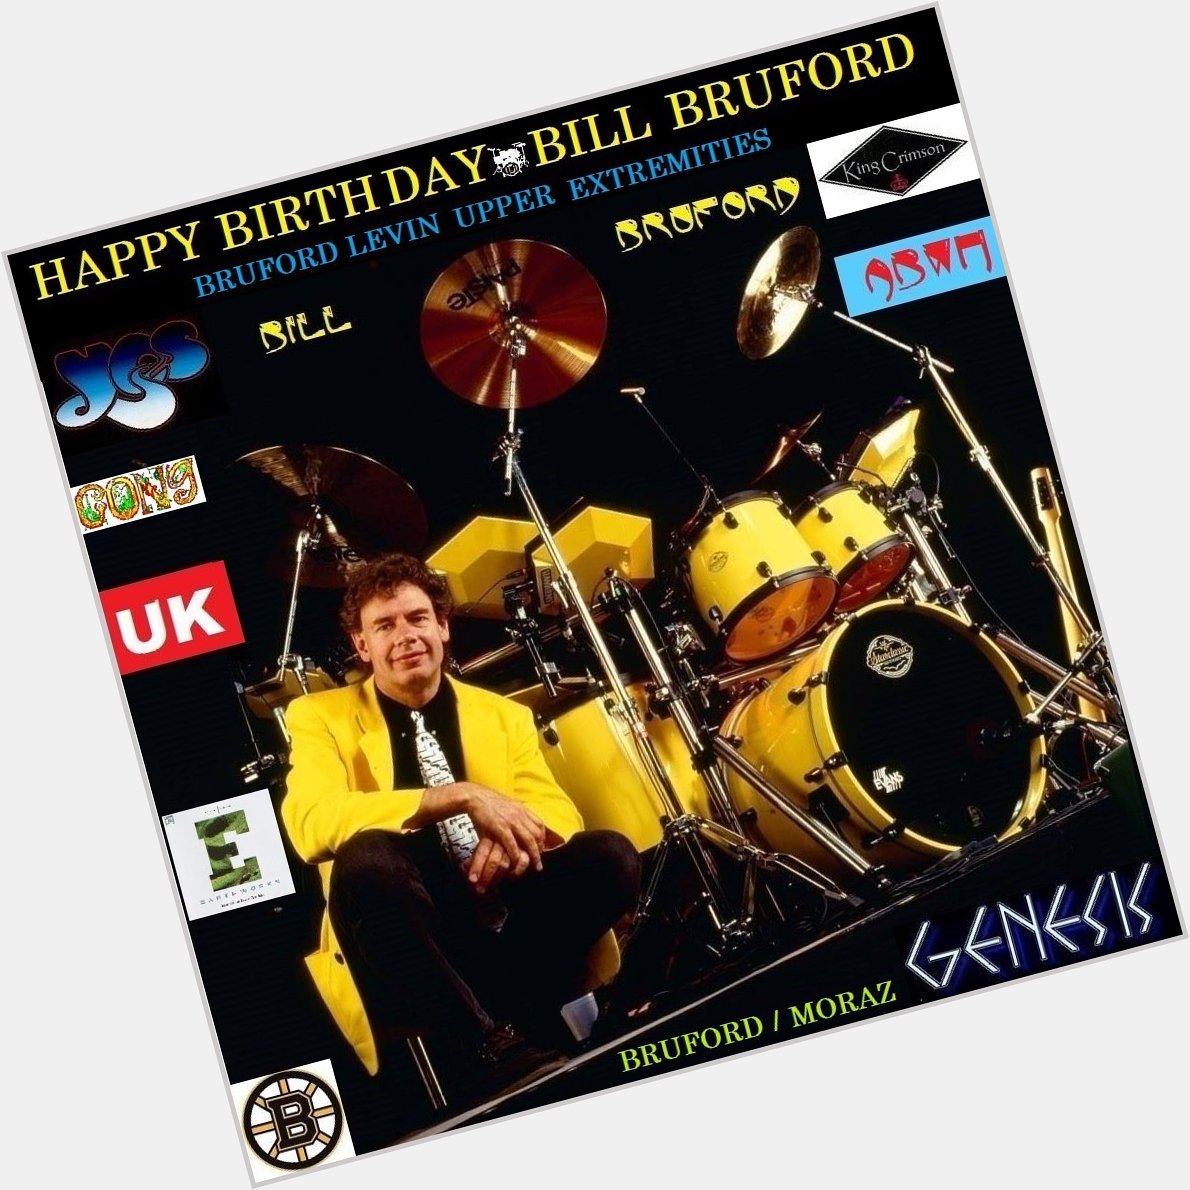 One of my favorite musicians in the world. Happy Birthday, Bill Bruford. 70 years-old today ... 